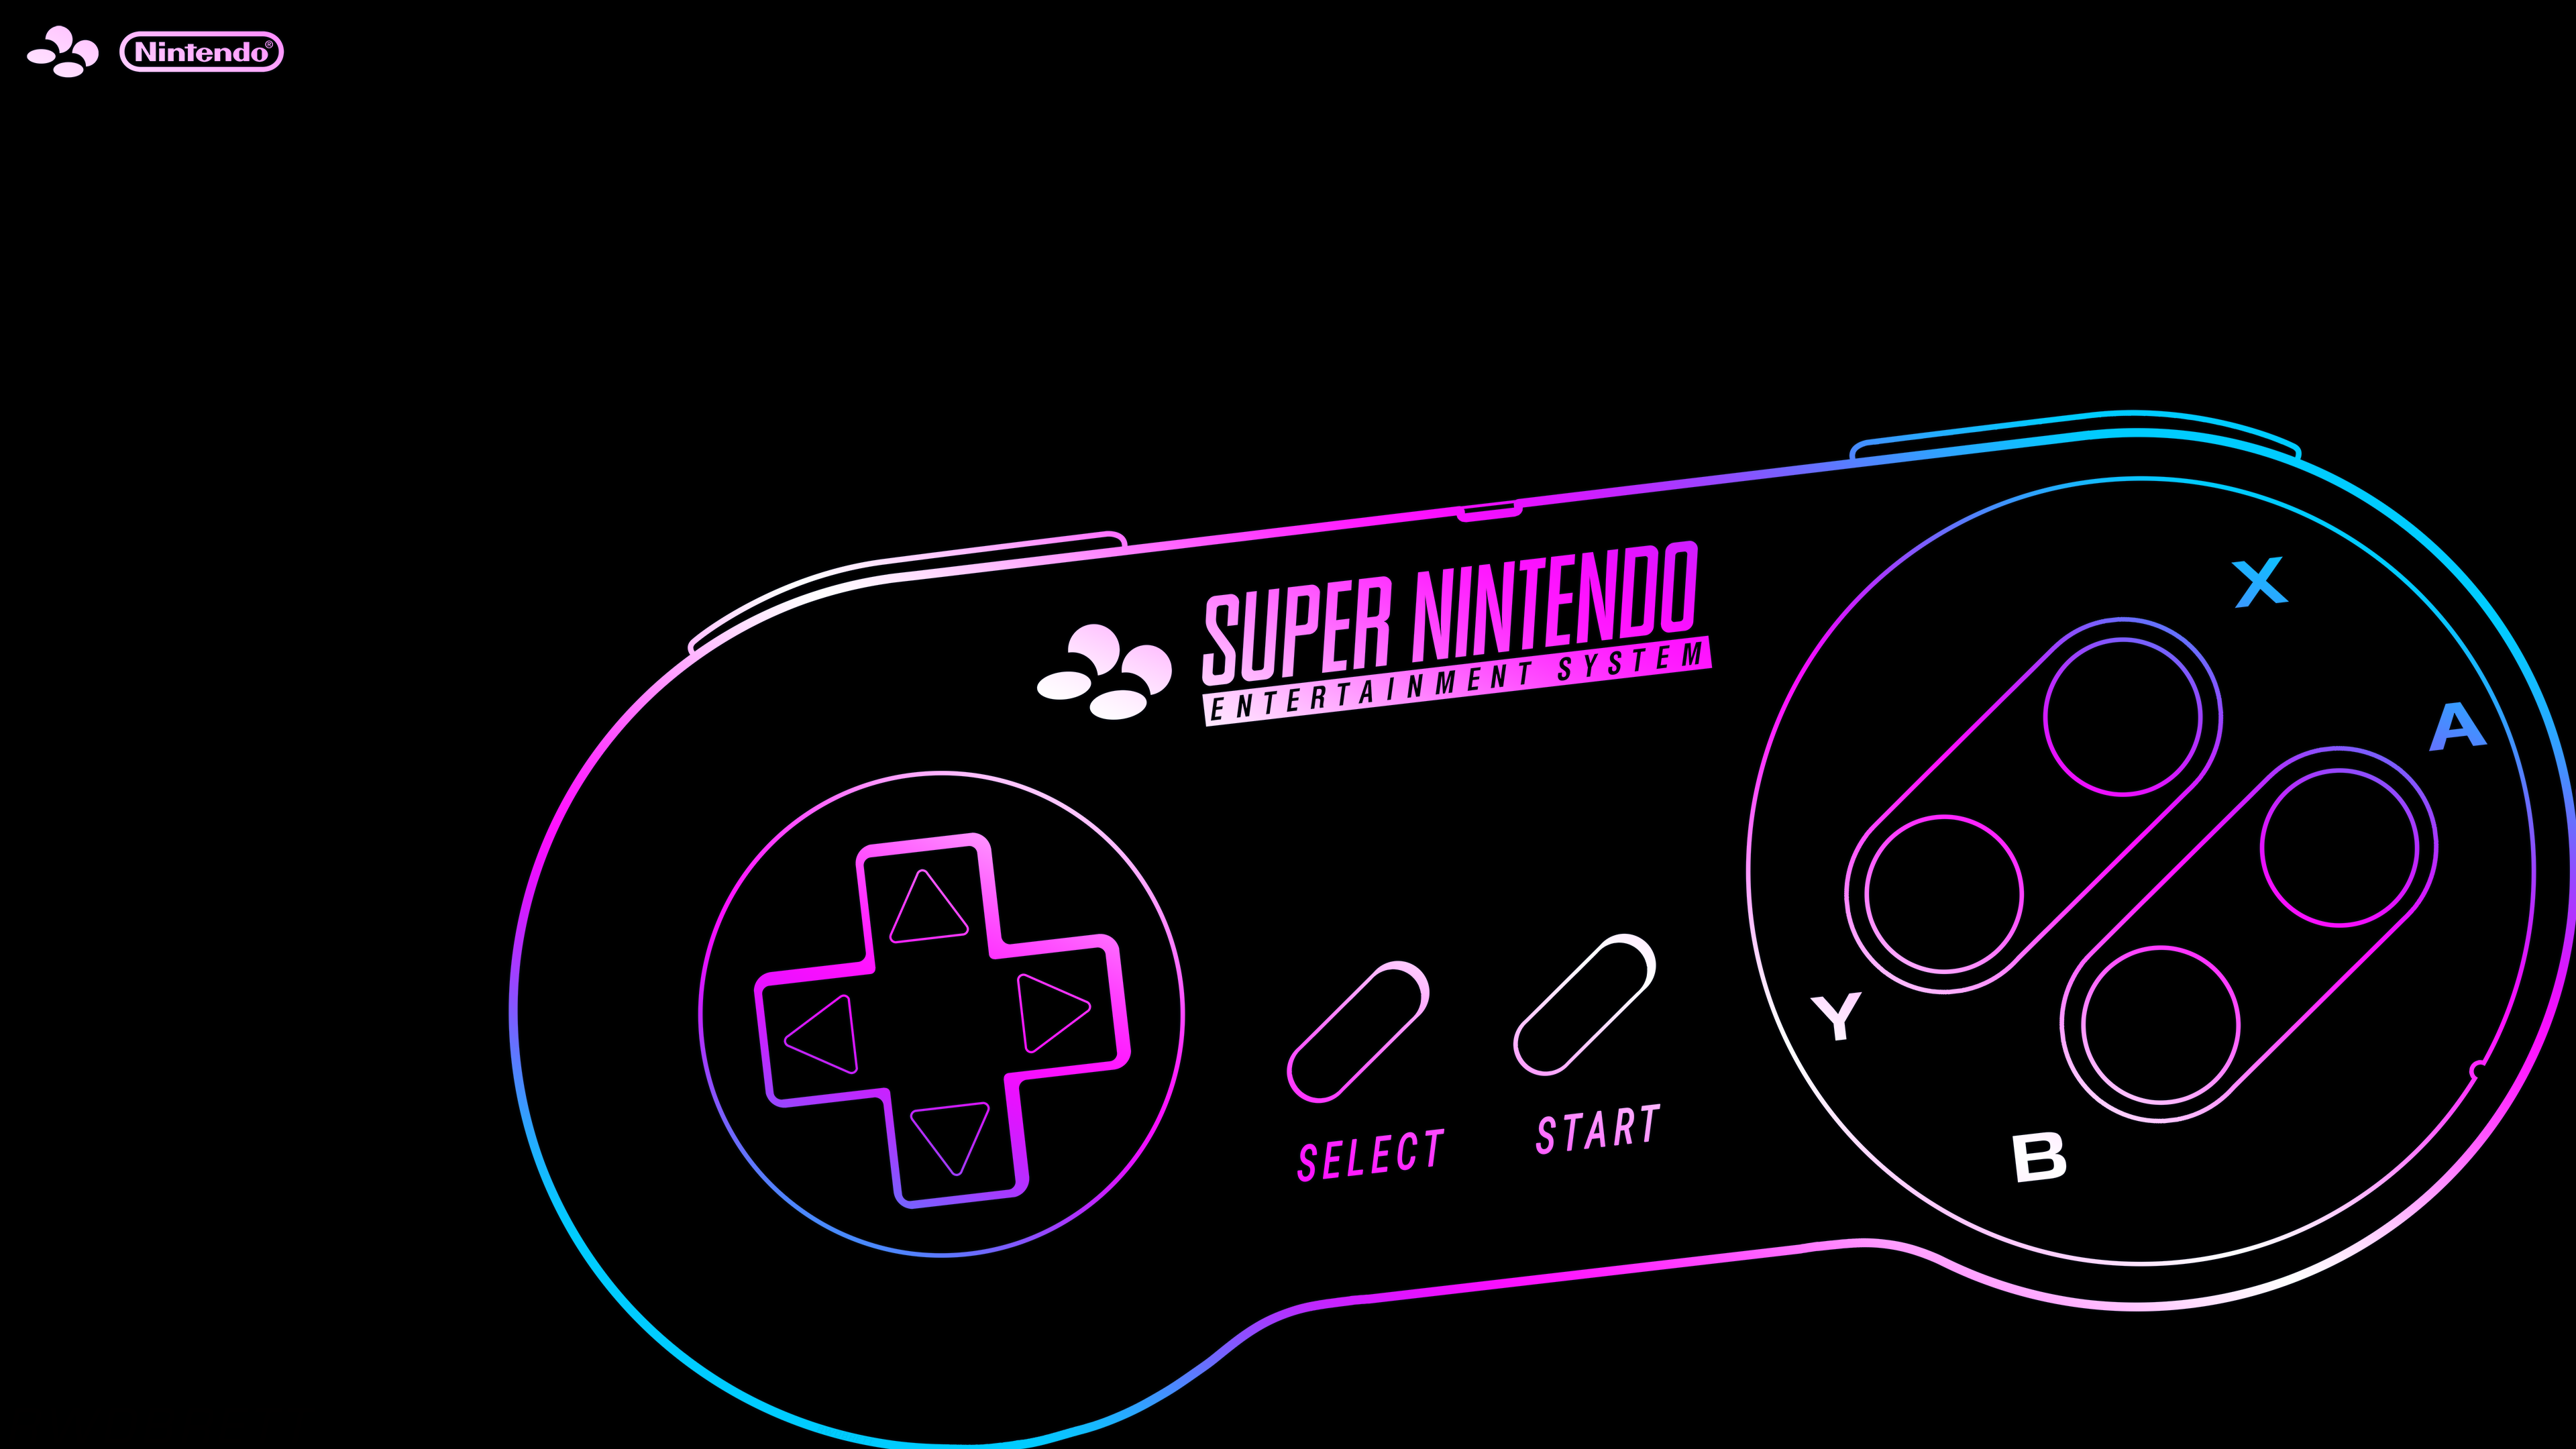 SNES Nintendo Controllers Retro Games Black Background Video Games Simple Background Logo 3840x2160